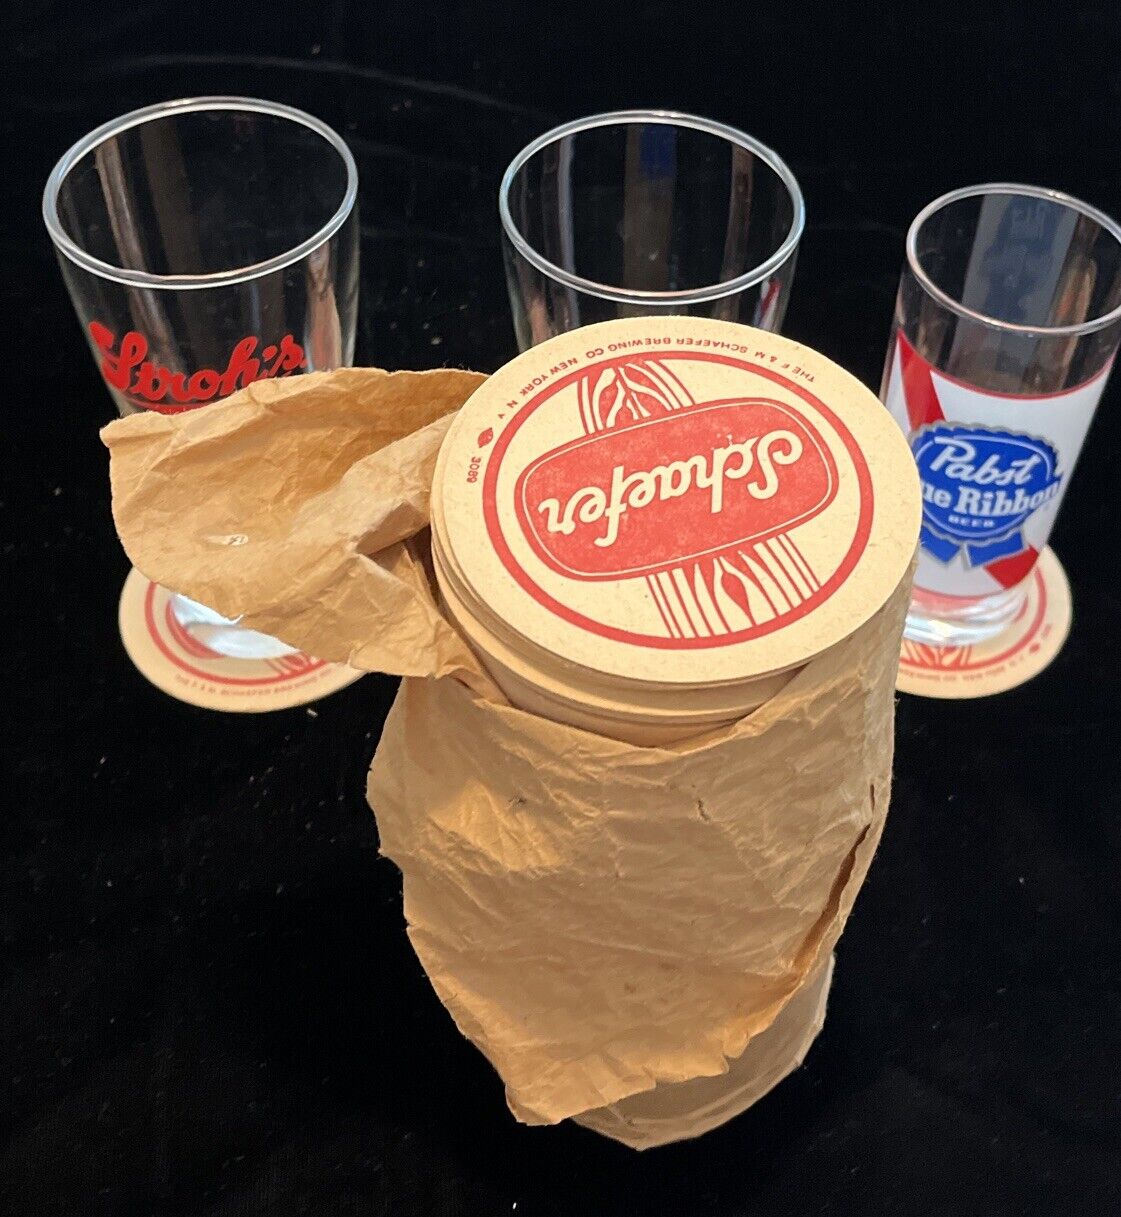 Set of 3 Collectible Beer Brand Glasses : Strohs ,(2) Pabst ++ Schaefer Coasters Без бренда - фотография #6